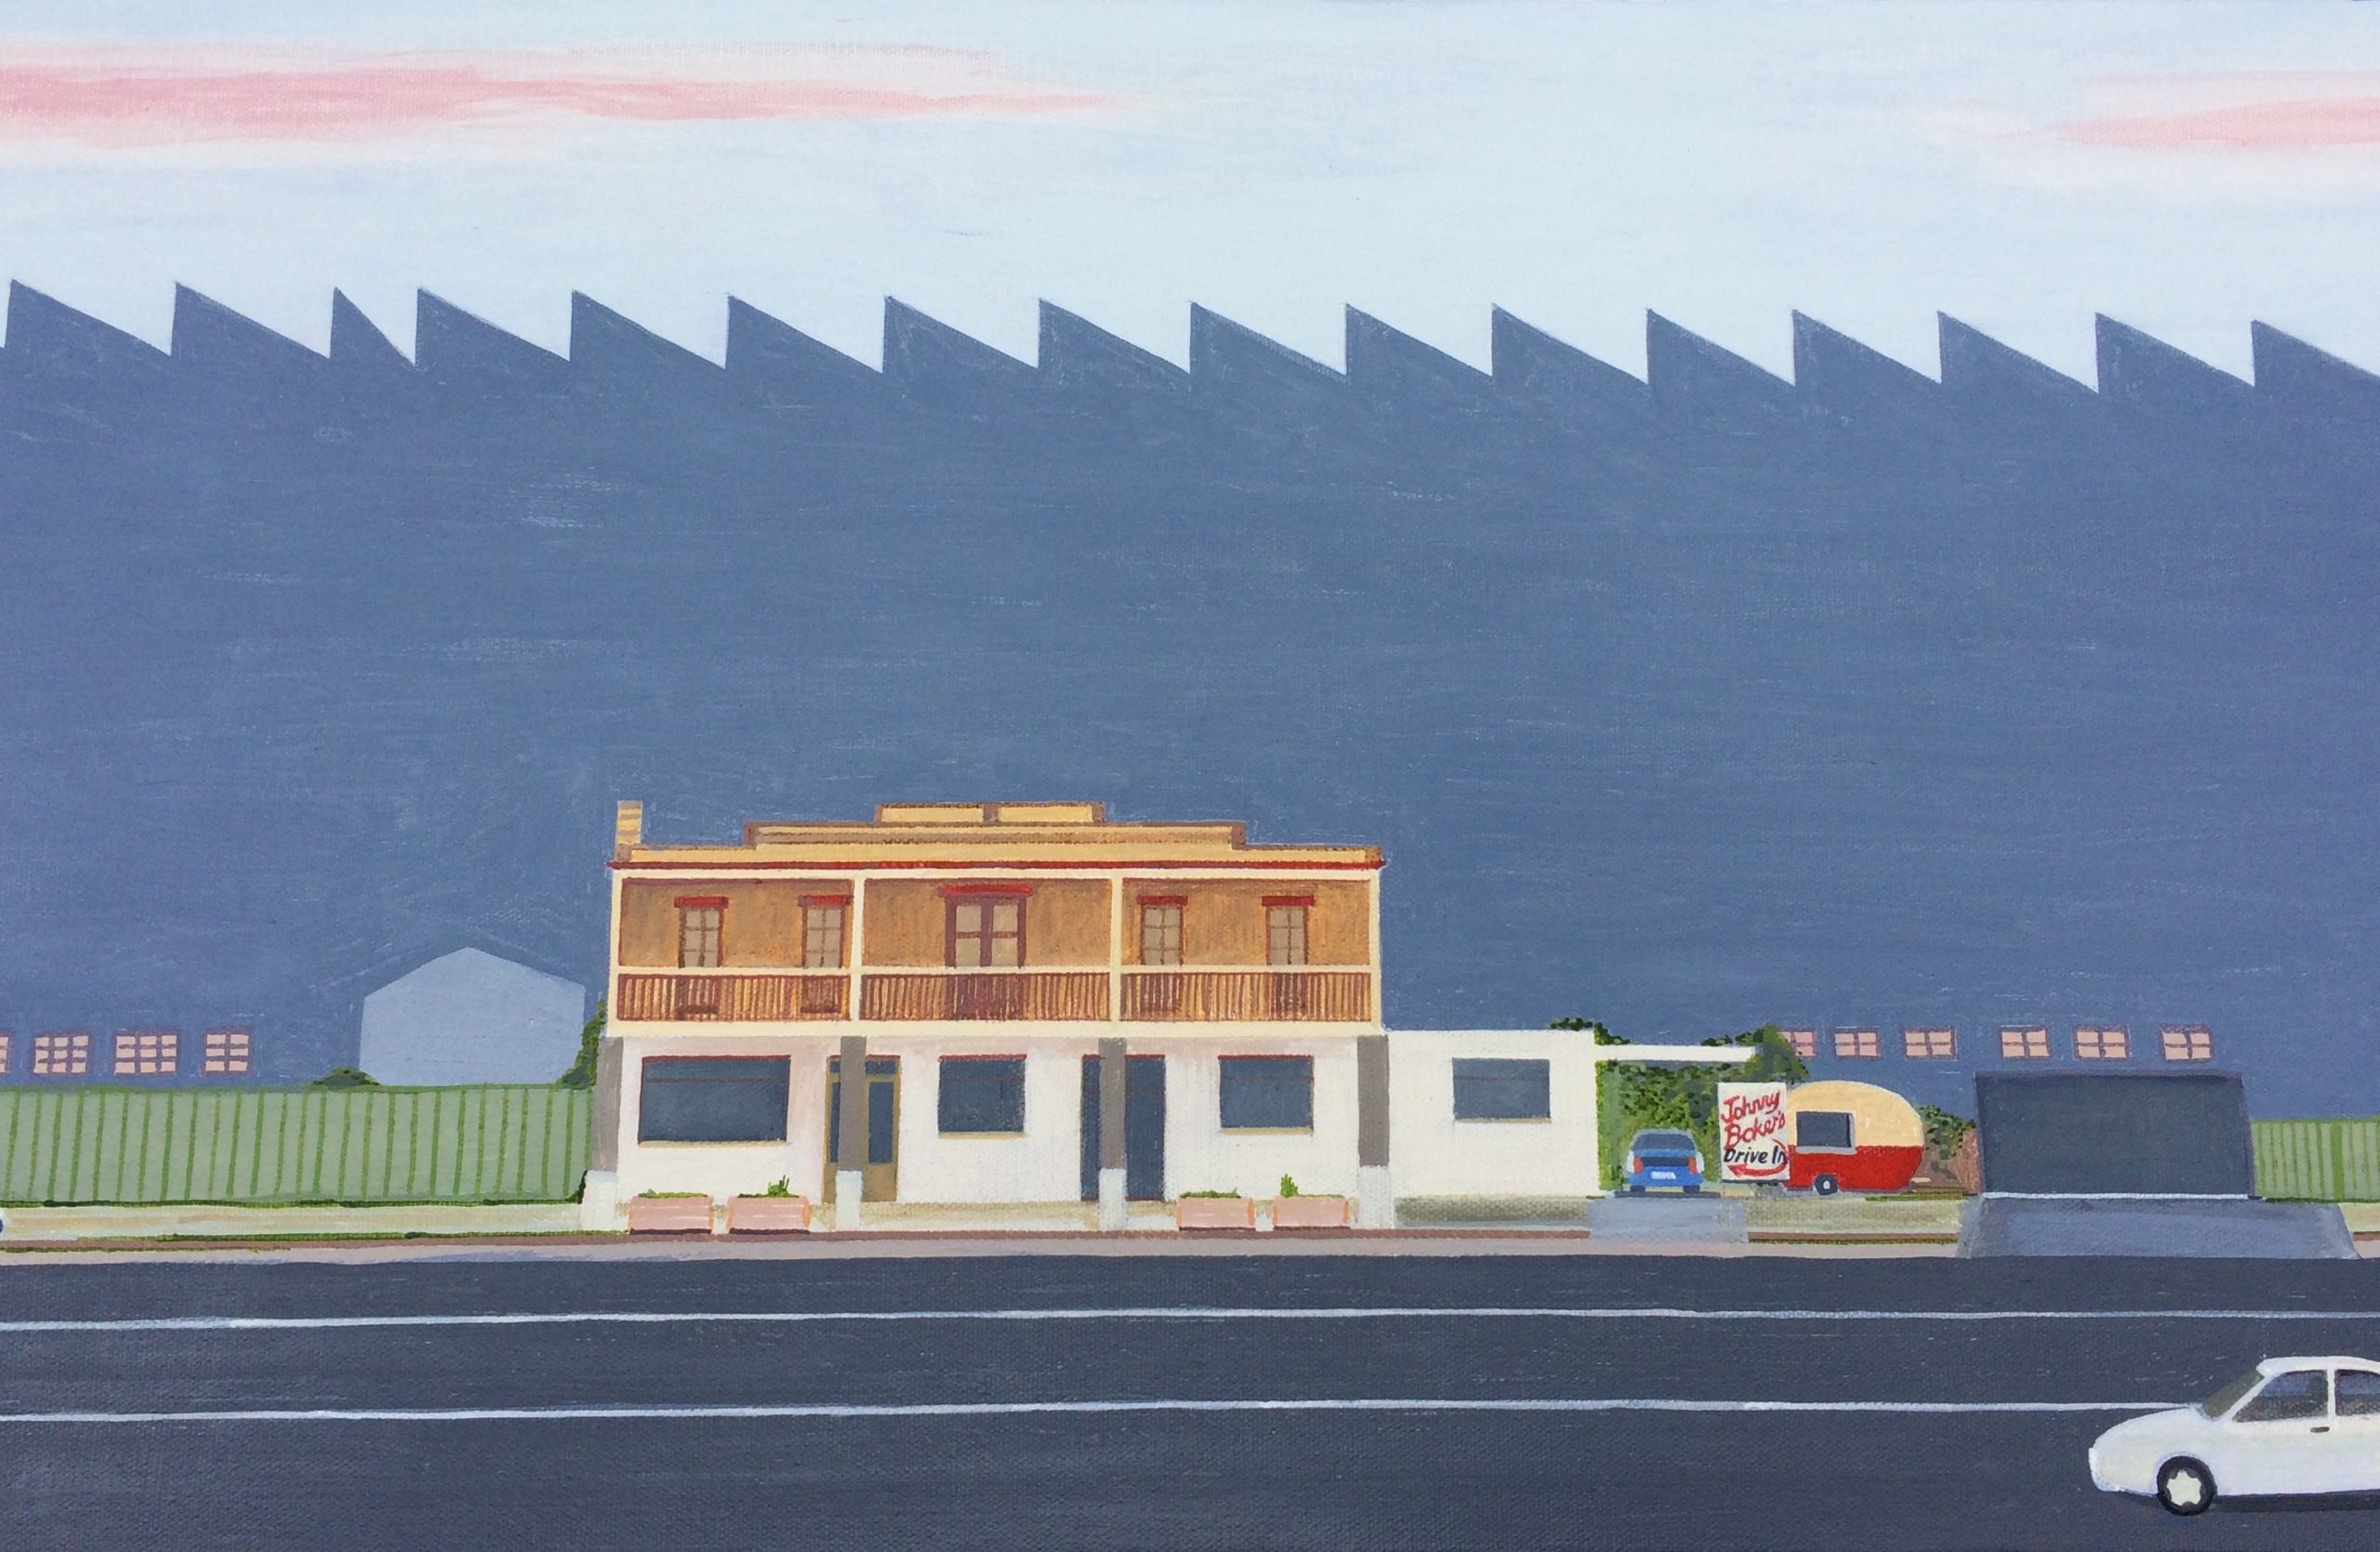 Painting 2017 Johnny Bakers at the New Northern Castlemaine